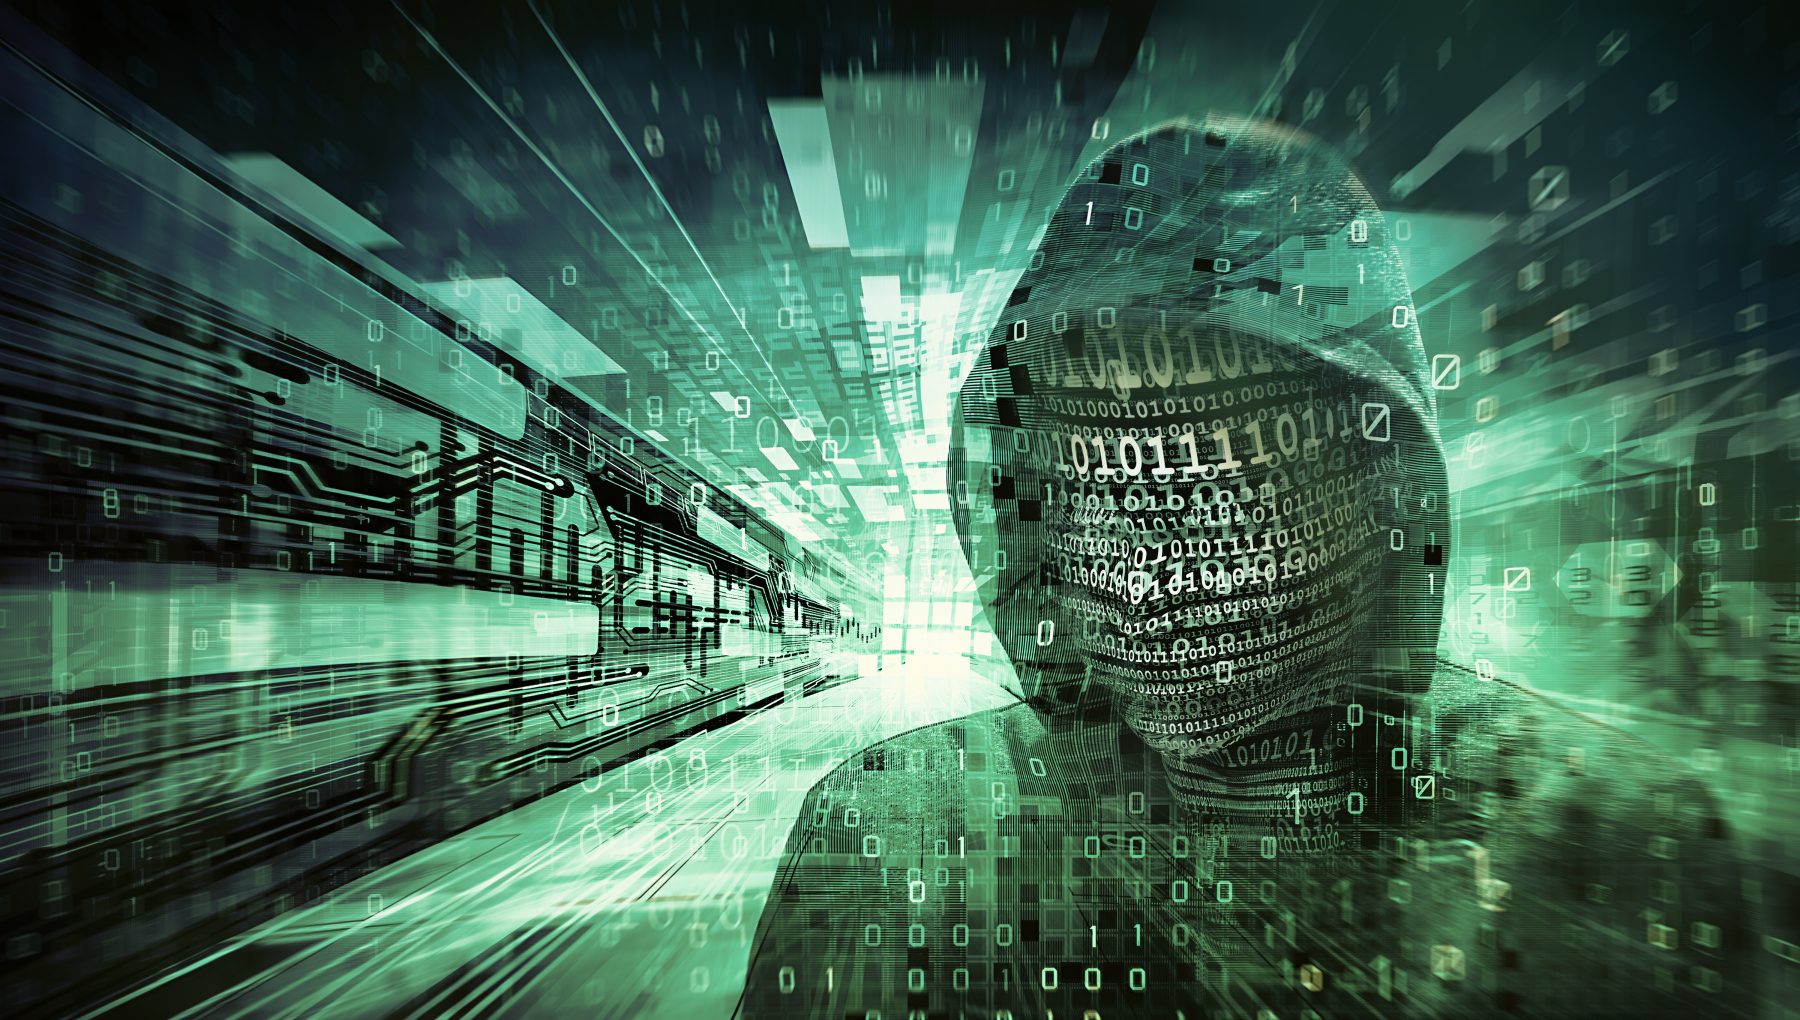 Kaspersky expects Metaverse exploitation and abuse to rise in 2023
